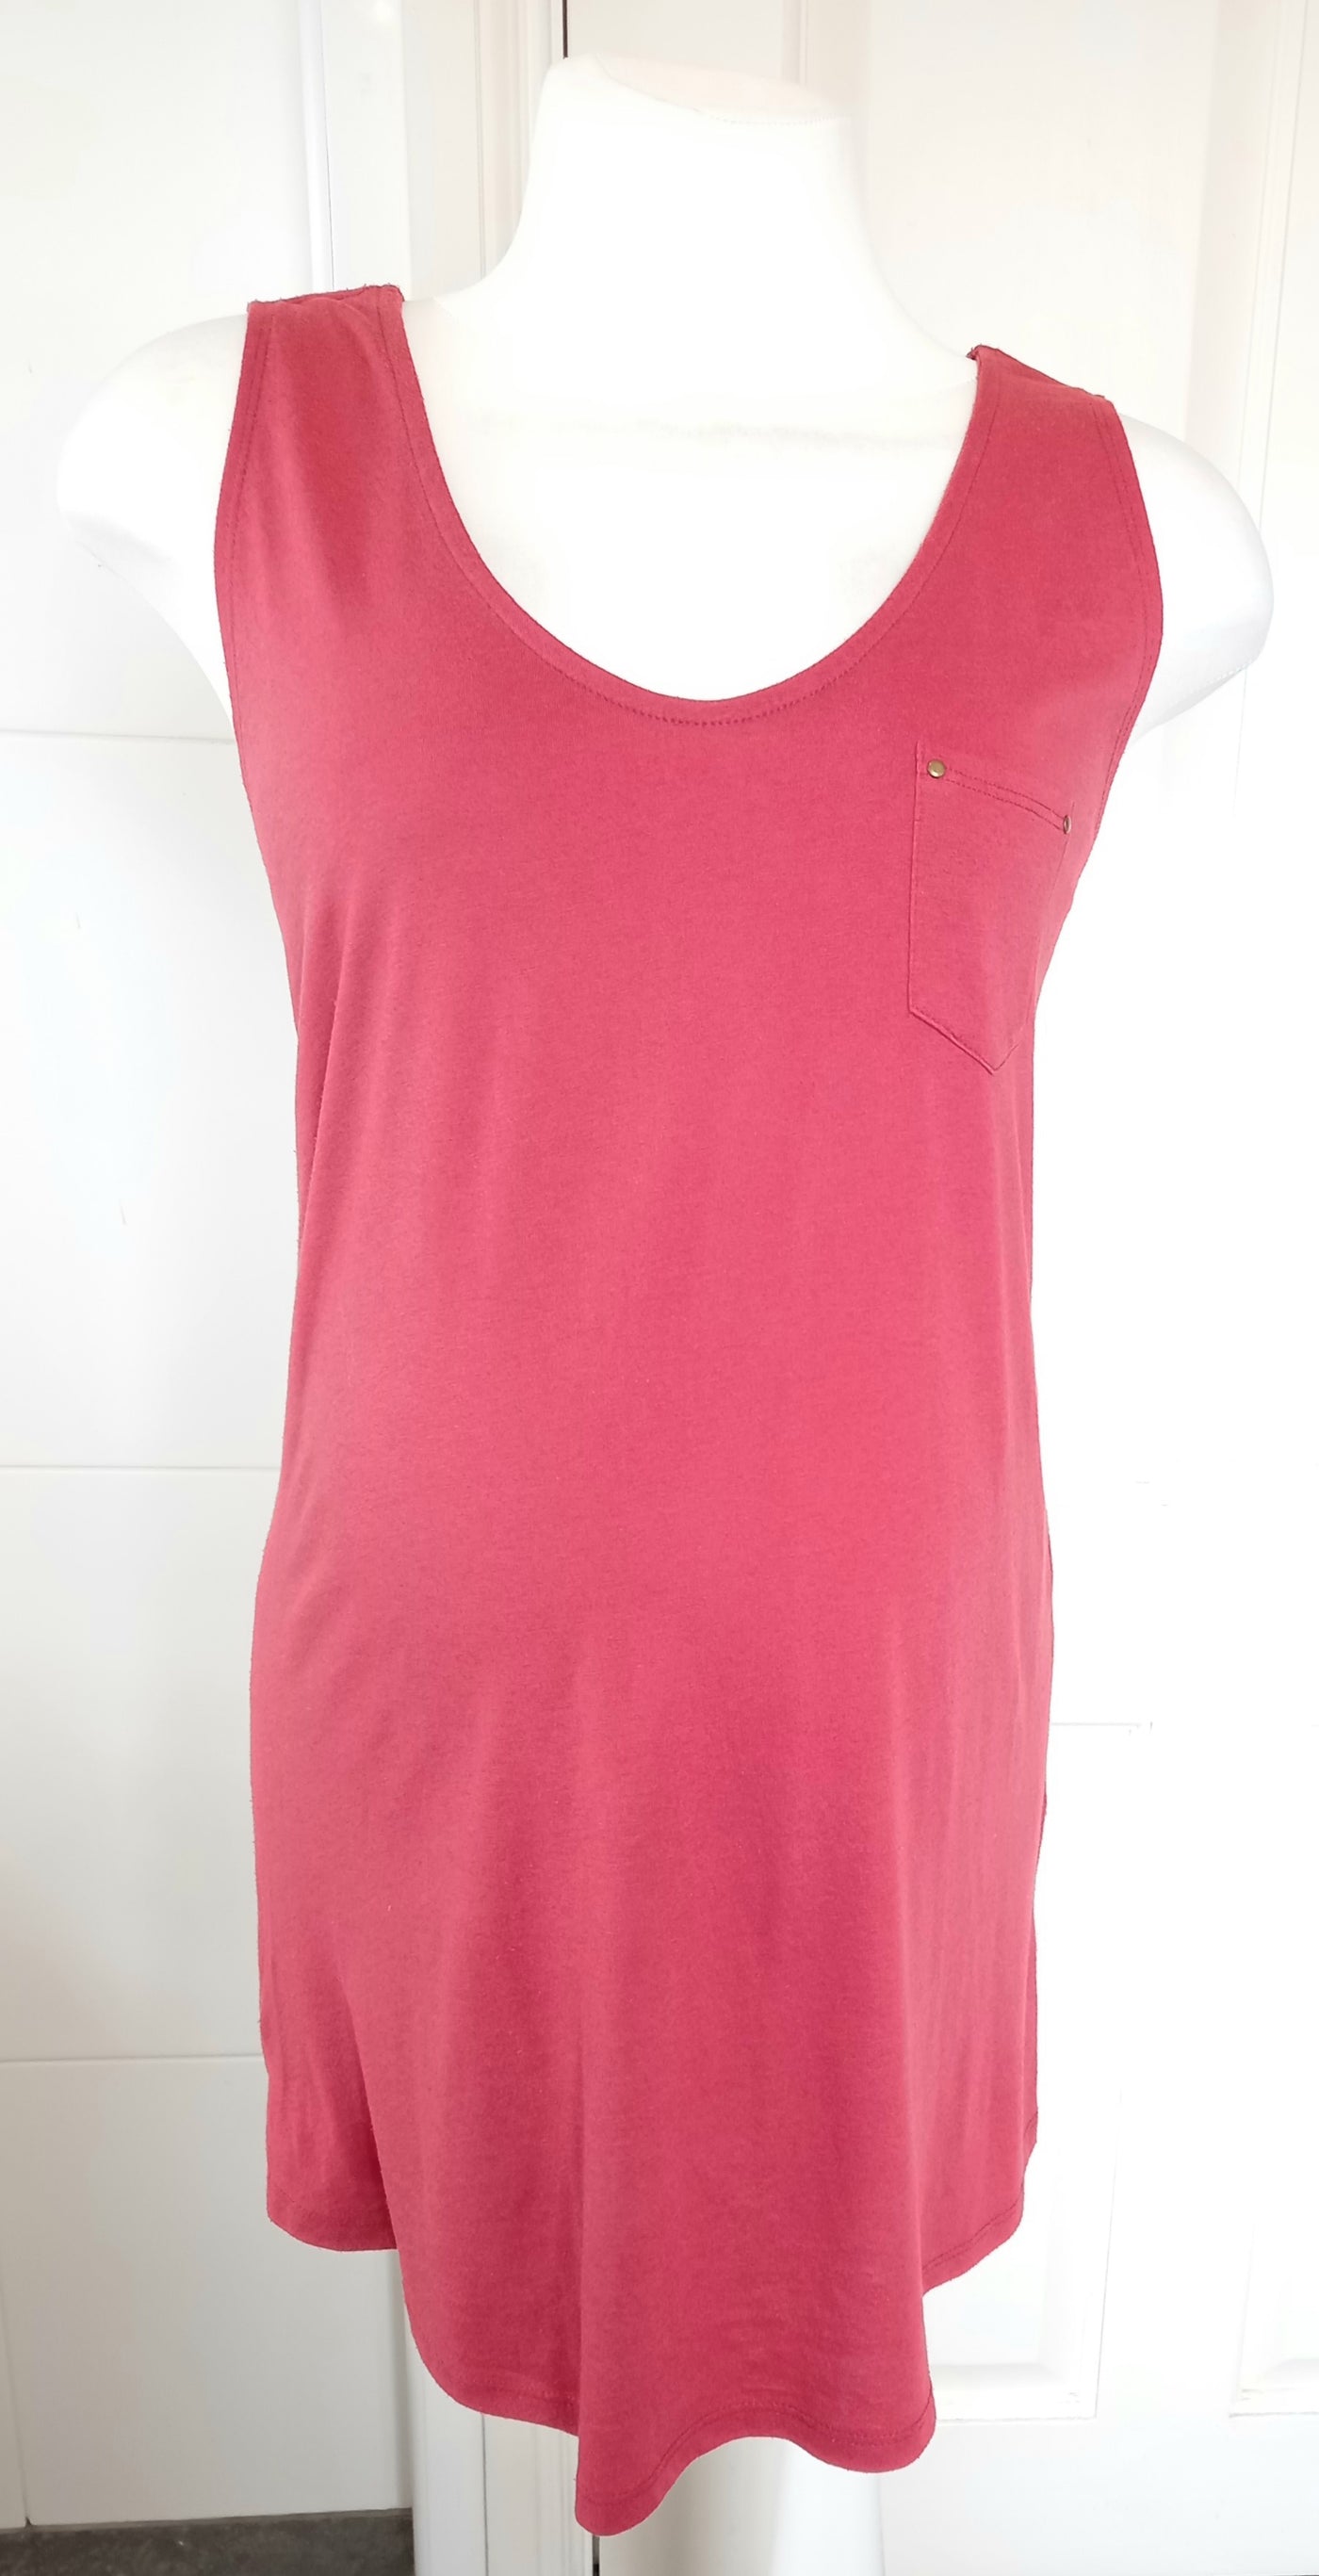 New Look Maternity Red Sleeveless Top with Pocket - Size 14